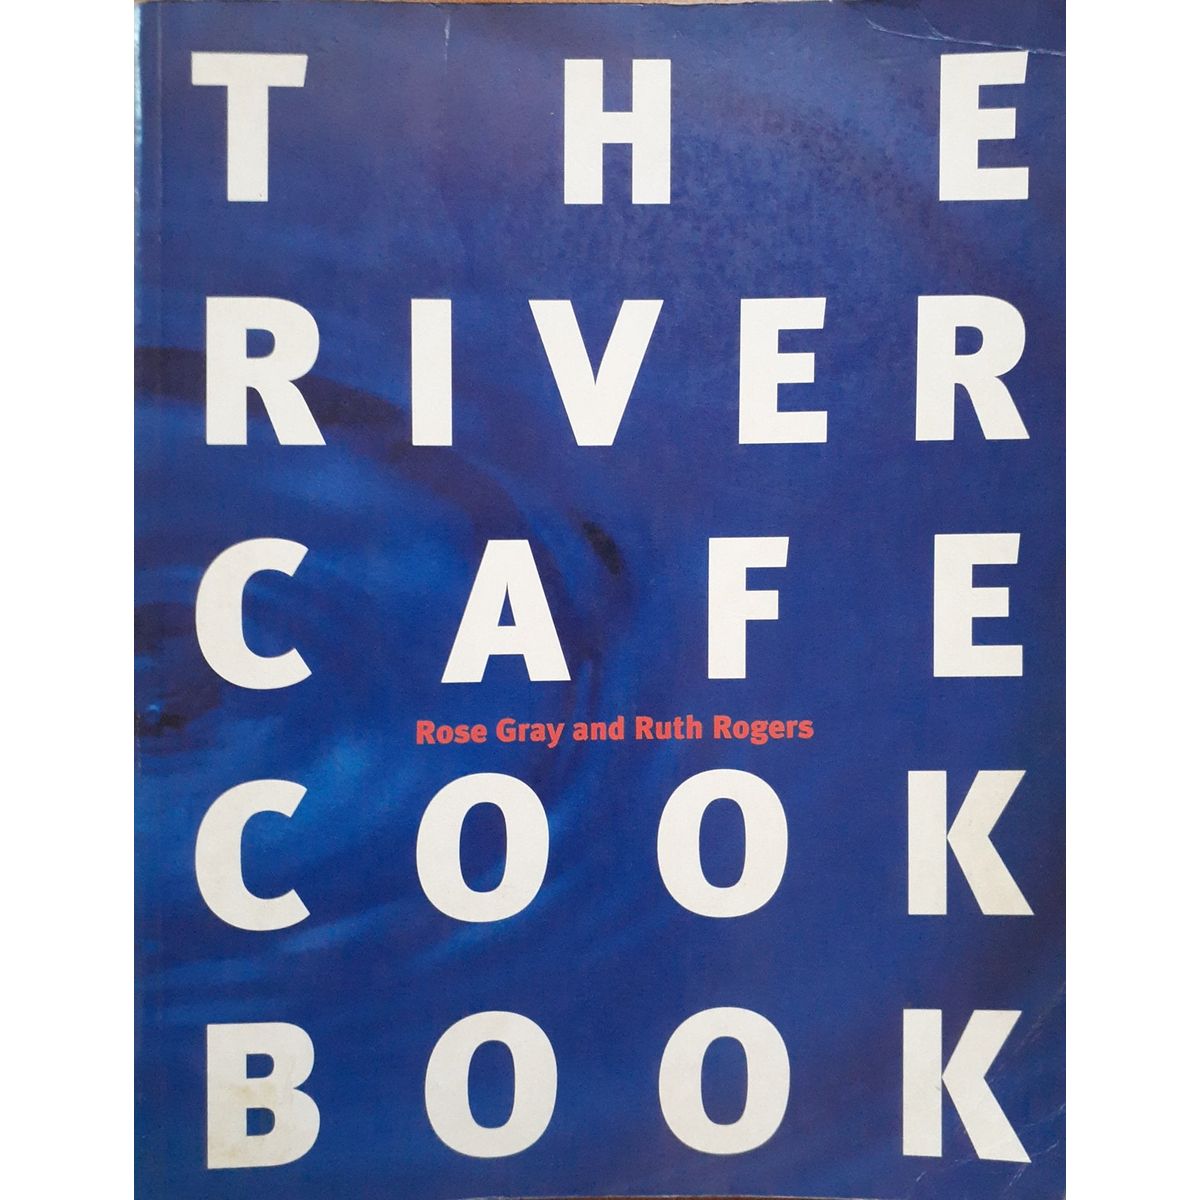 ISBN: 9780091812553 / 0091812550 - The River Cafe Cookbook by Rose Gray and Ruth Rogers [1995]